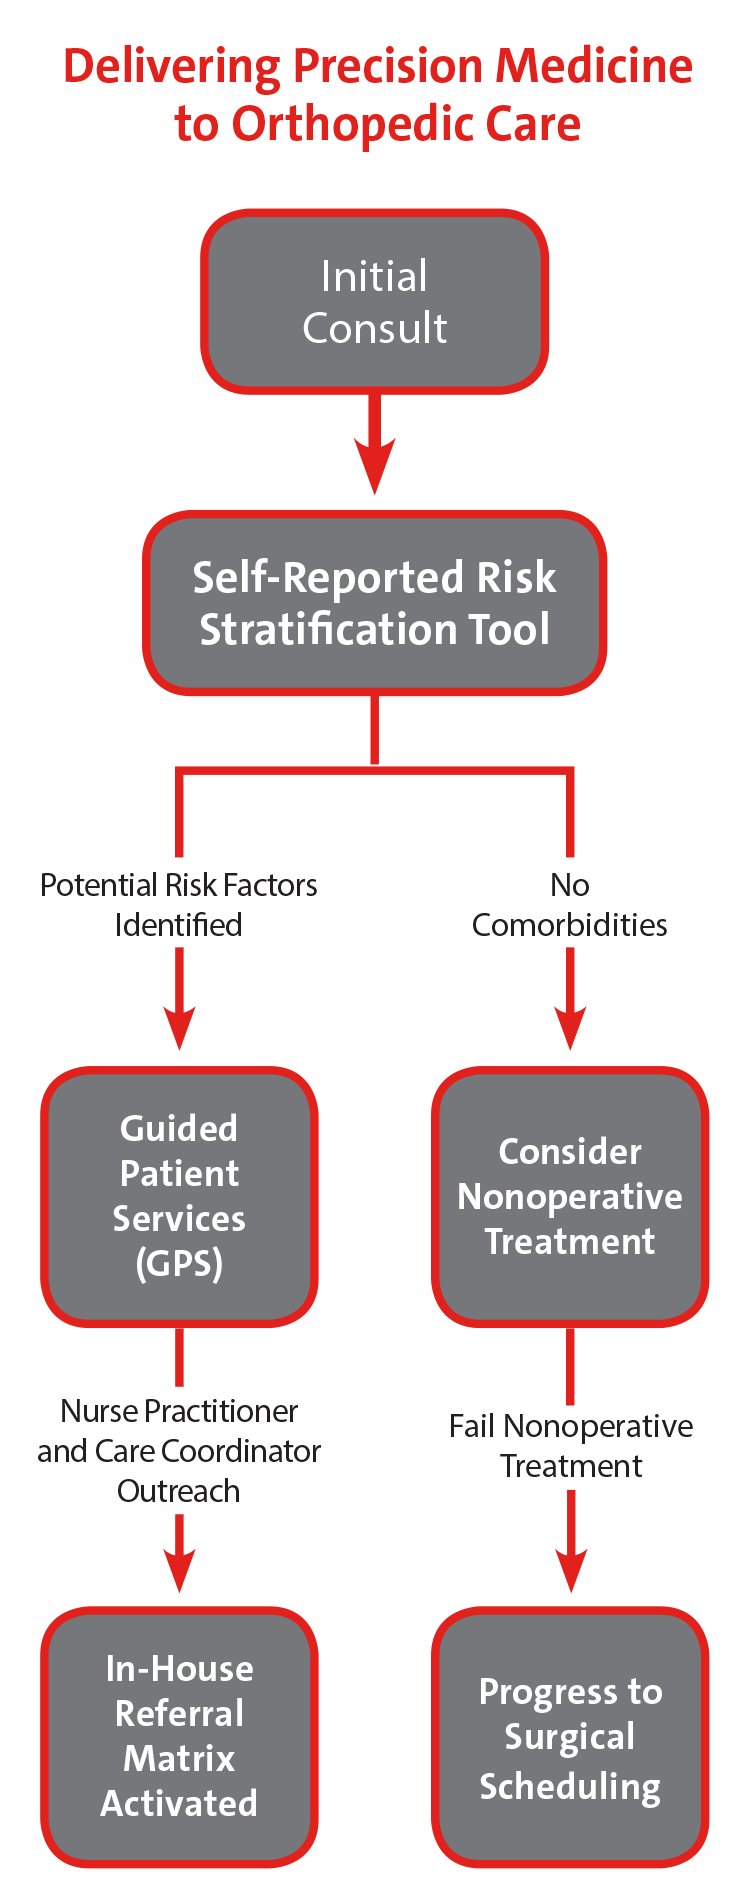 Delivering Precision Medicine to Orthopedic Care flow chart